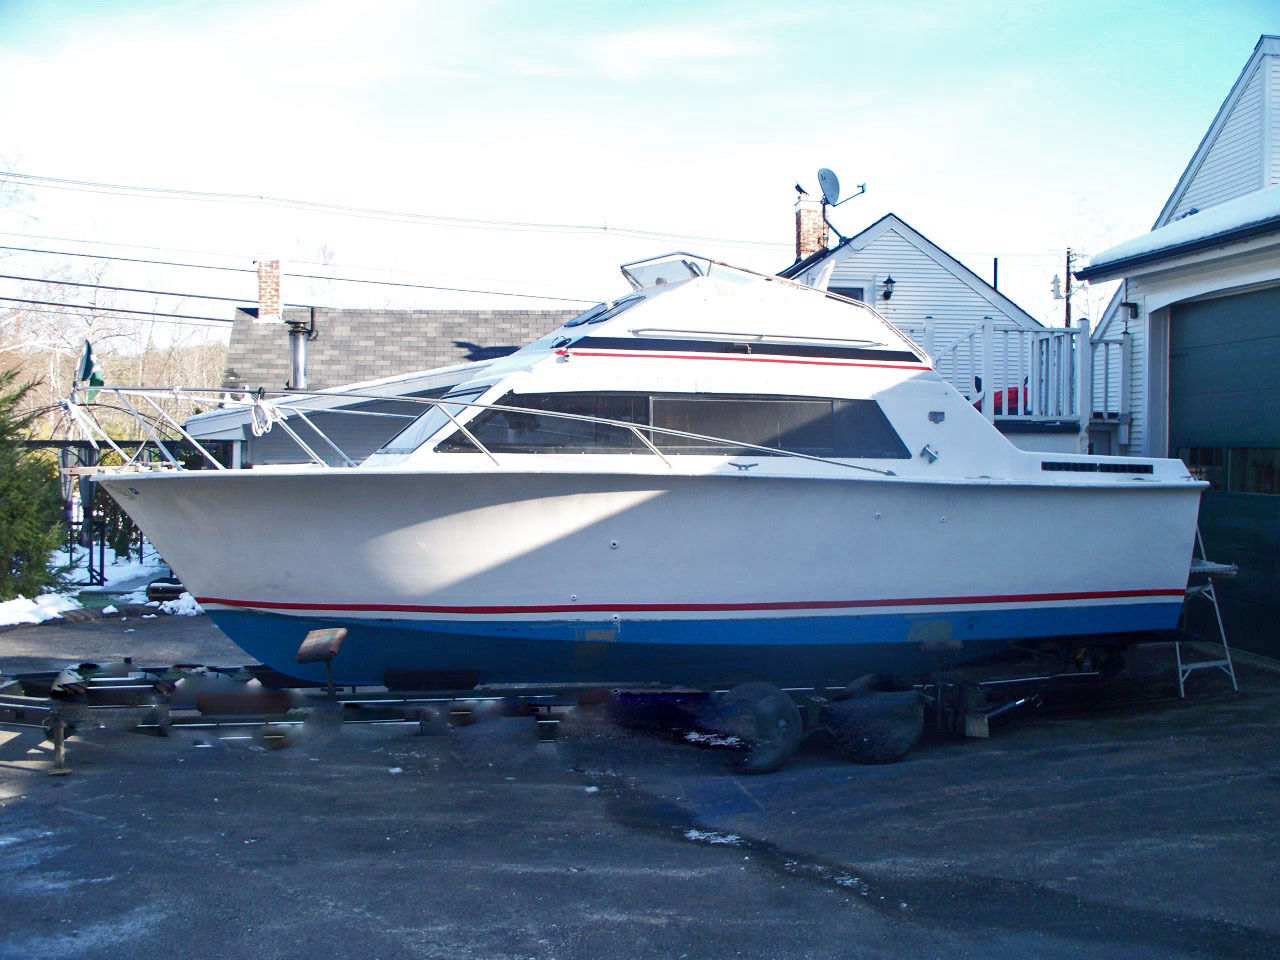 Pacemaker Concept 1978 for sale for $6,500 - Boats-from ...